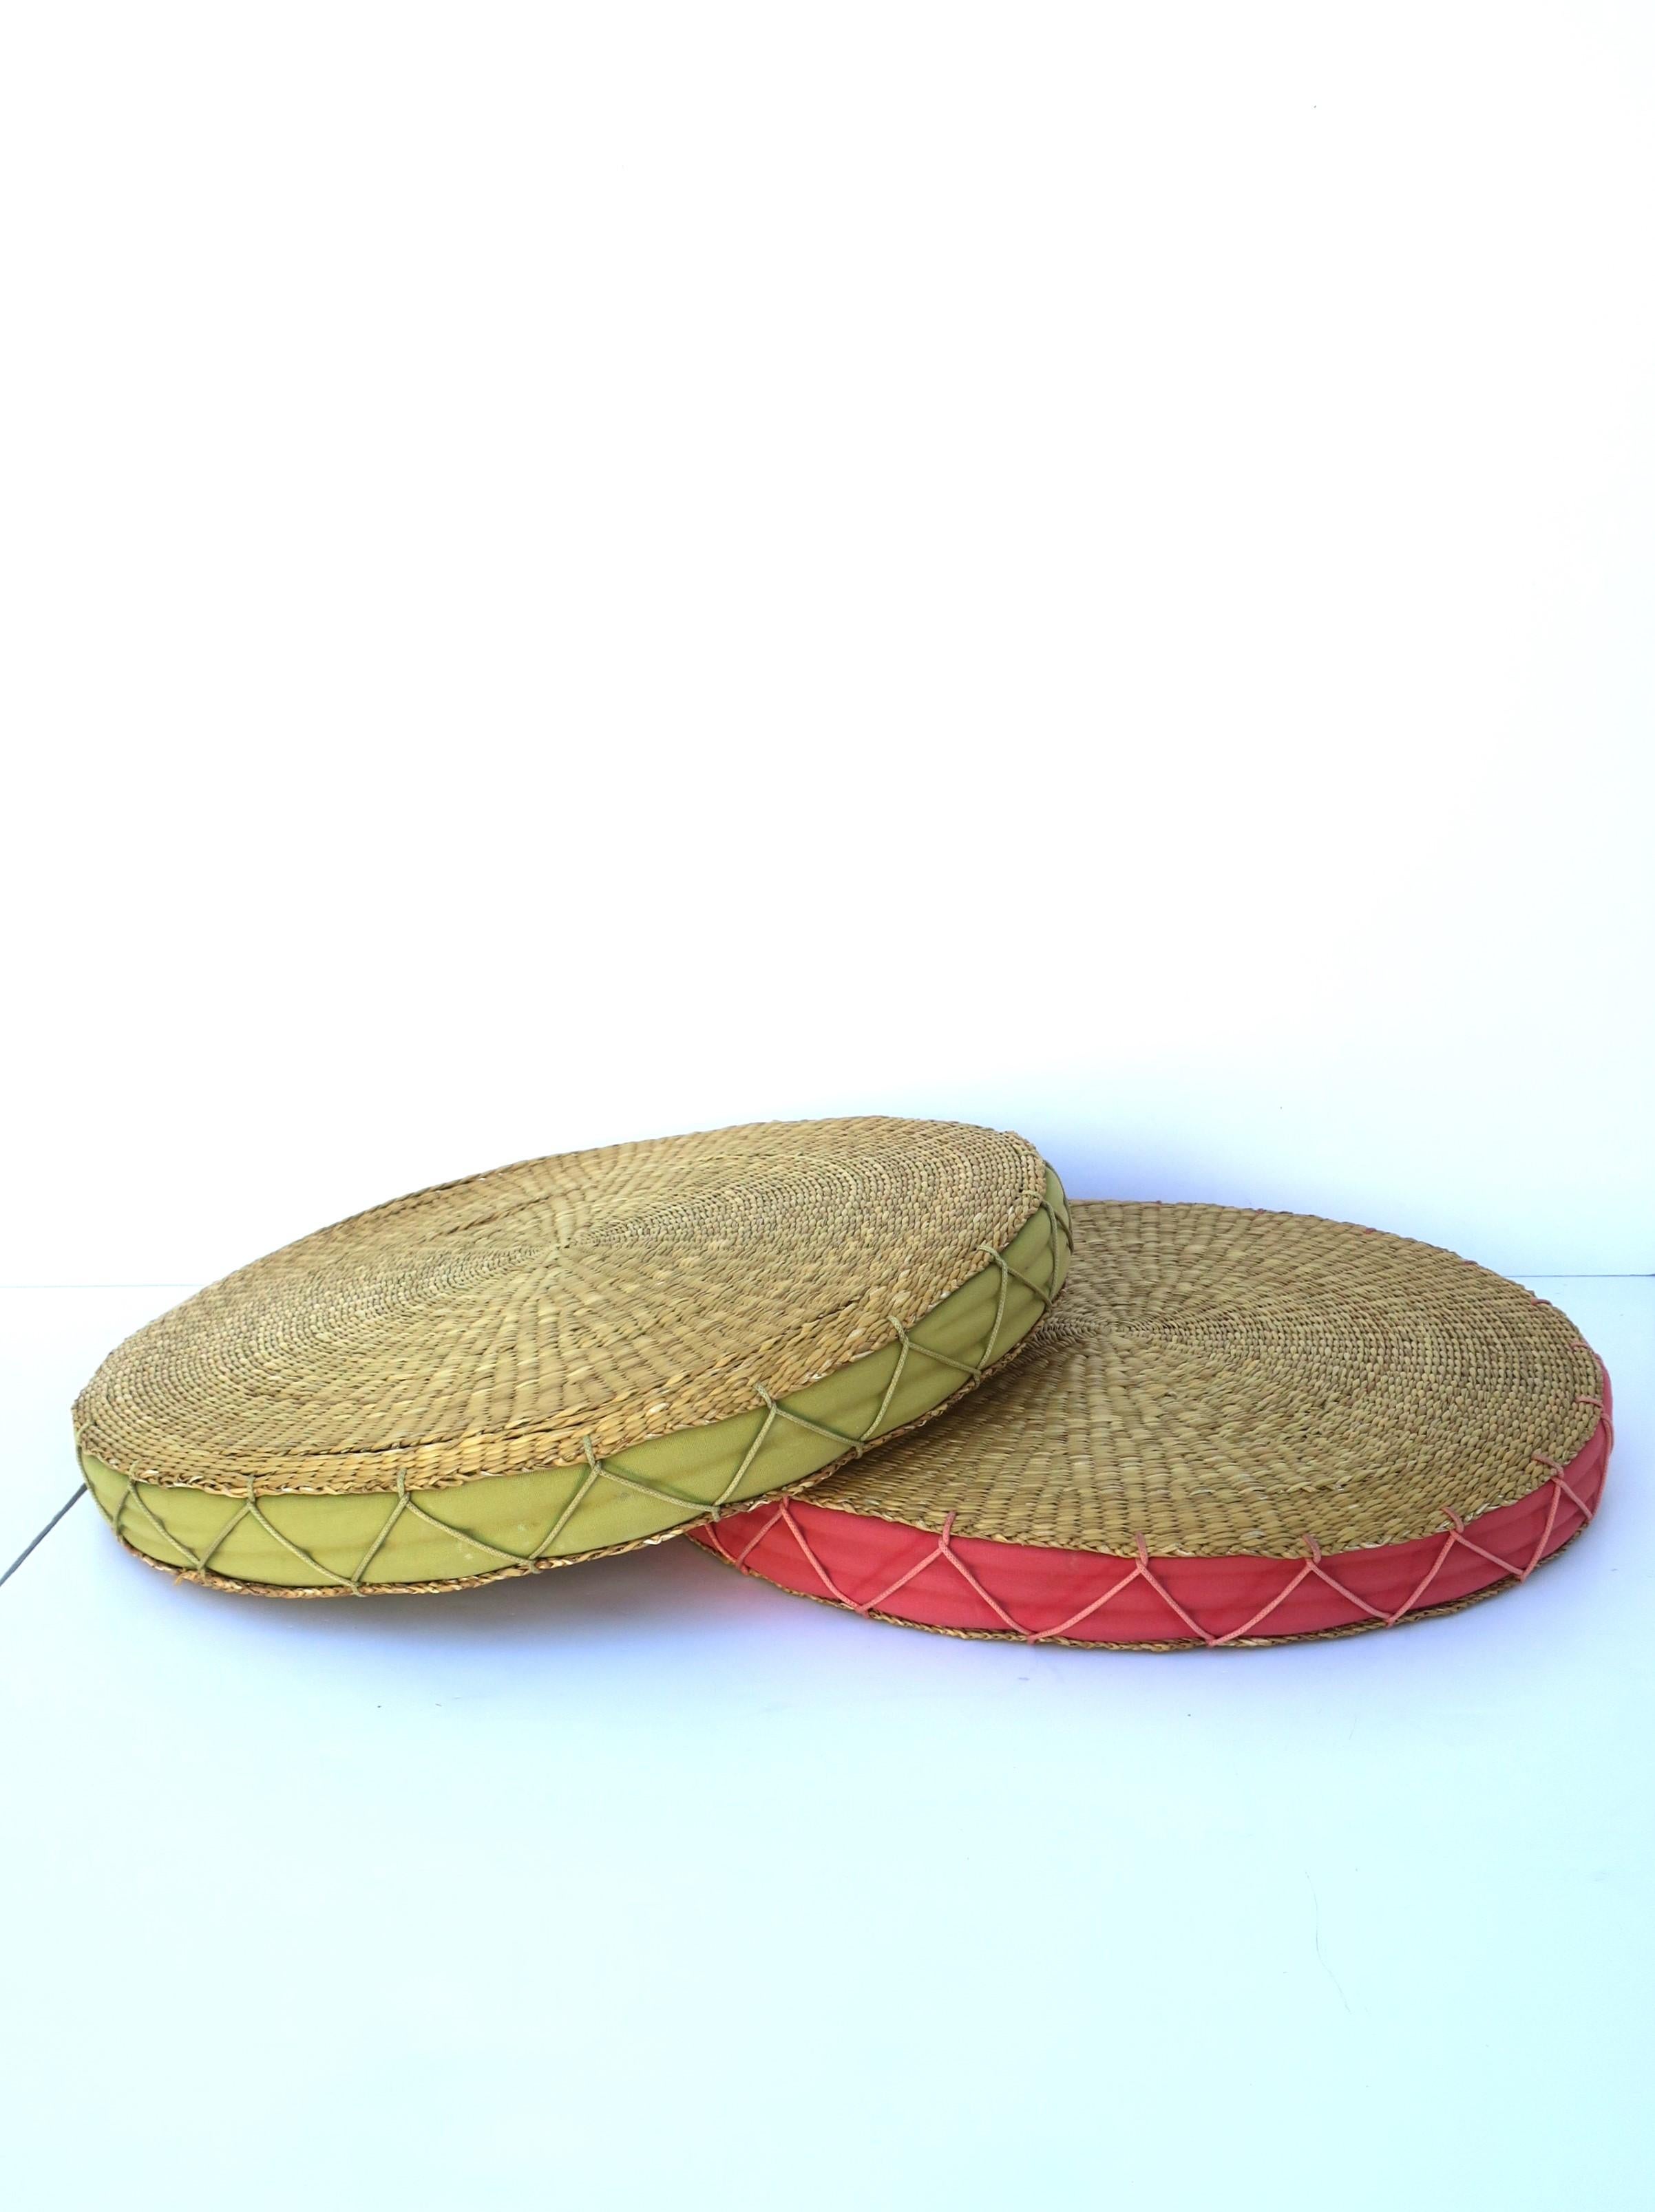 20th Century Wicker Seat or Floor Cushion, Green and Tan For Sale